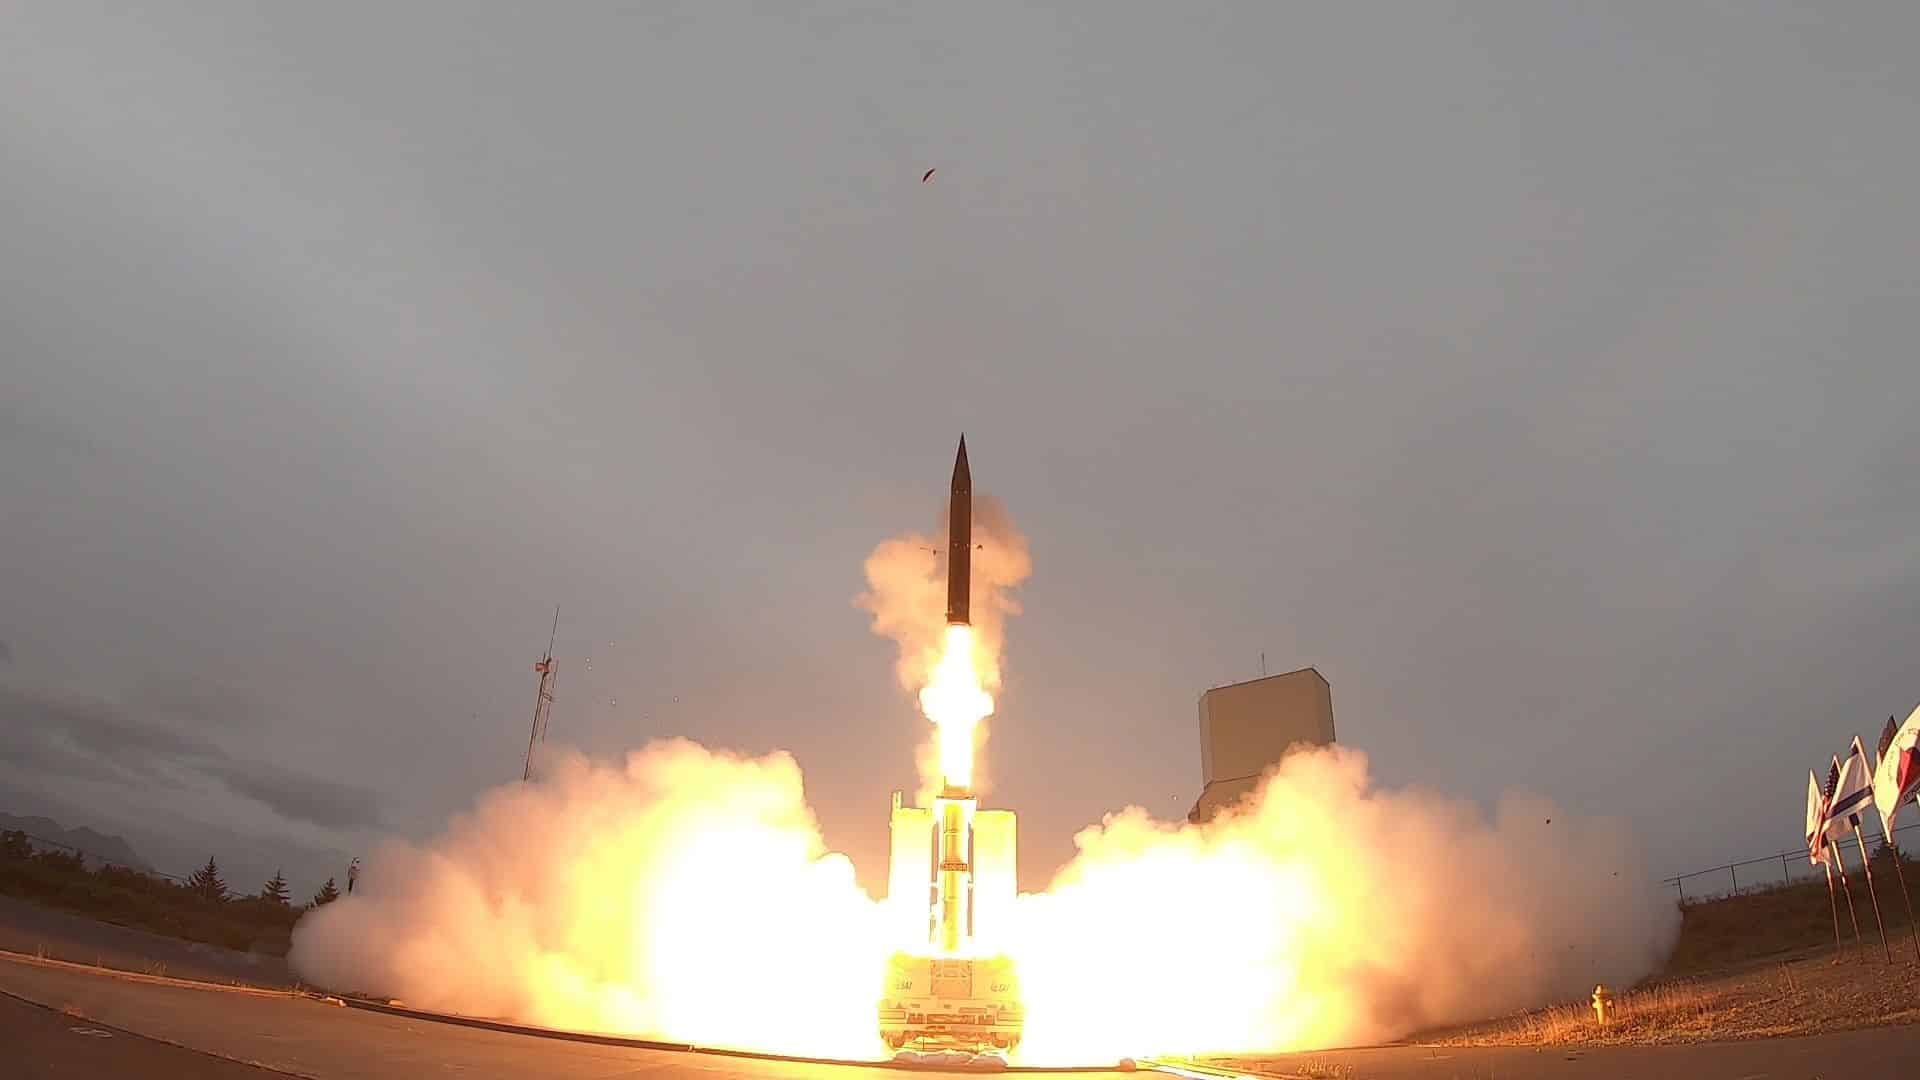 The Israel Missile Defense Organization (IMDO) of the Directorate of Defense Research and Development (DDR&D) and the U.S. Missile Defense Agency (MDA) completed a successful flight test campaign with the Arrow-3 Interceptor missile. Flight Test Arrow-01 demonstrated the Israeli Arrow Weapon System’s ability to conduct a high altitude hit-to-kill engagement. Interceptor tests were conducted that successfully destroyed target missiles. These test were conducted at Pacific Spaceport Complex-Alaska (PSCA) in Kodiak, Alaska.